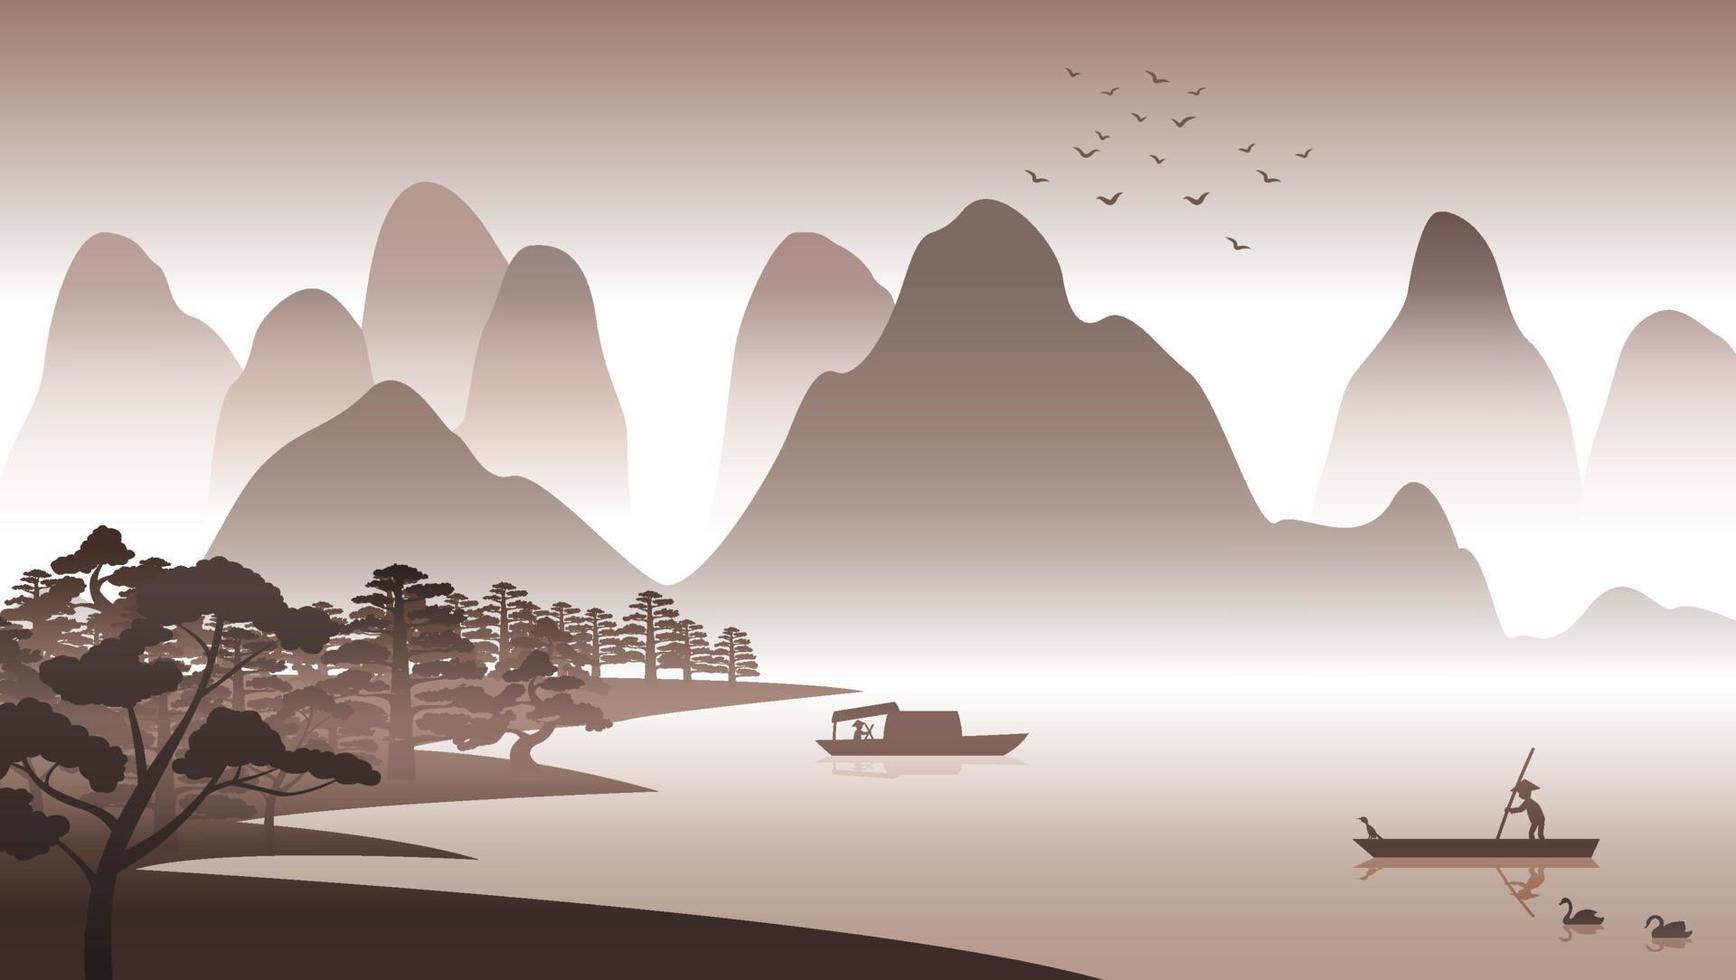 Silhouette design of China nature scenery with computer art vector